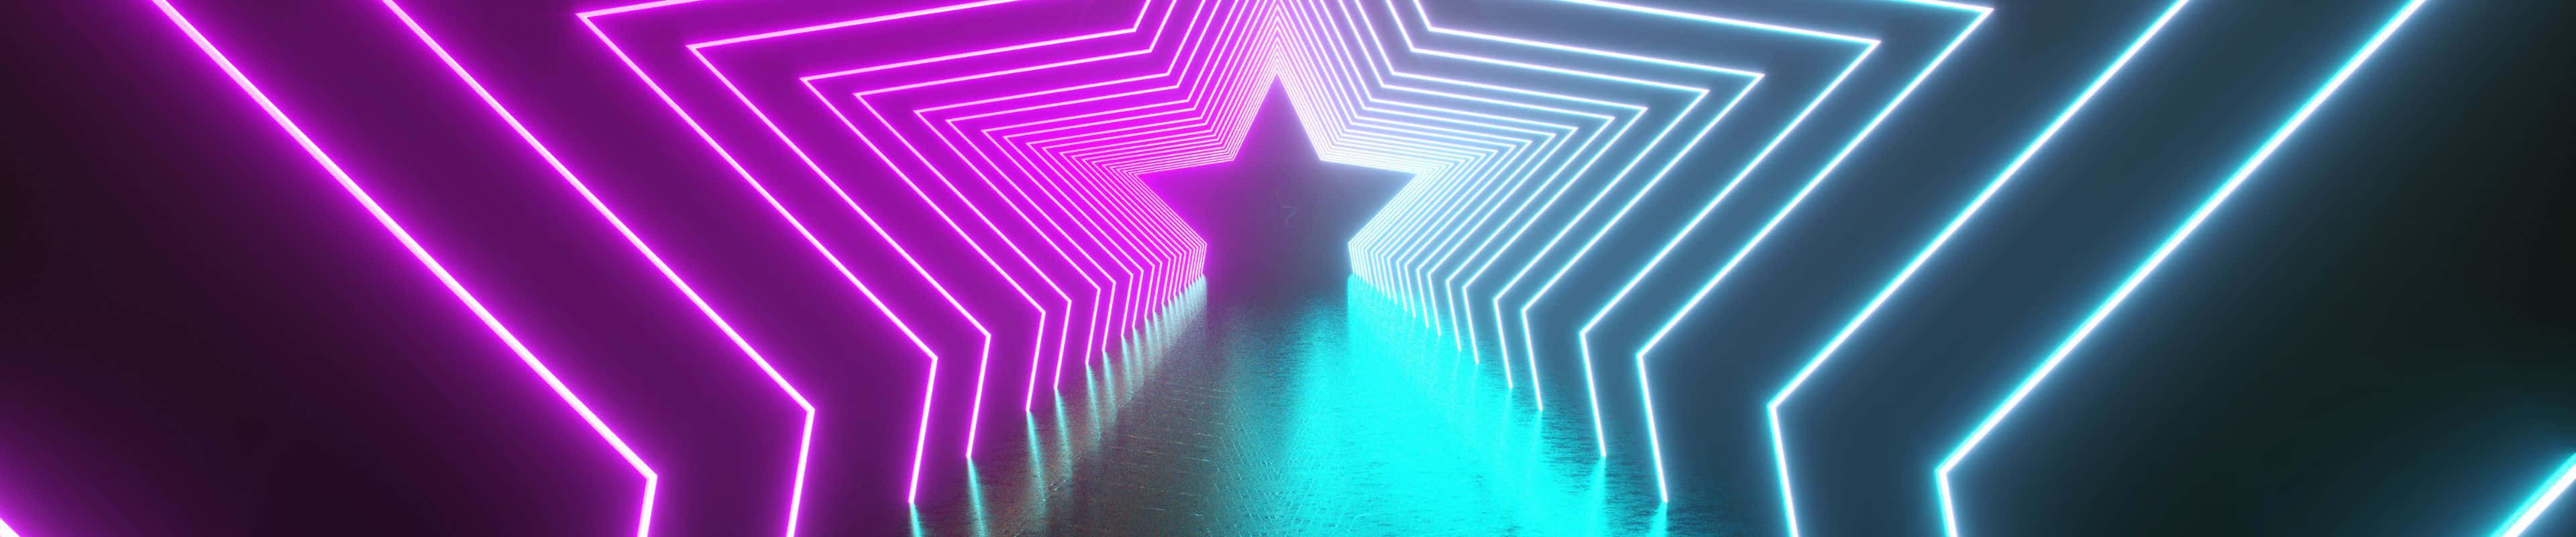 A Neon Light Tunnel With A Person In It Wallpaper